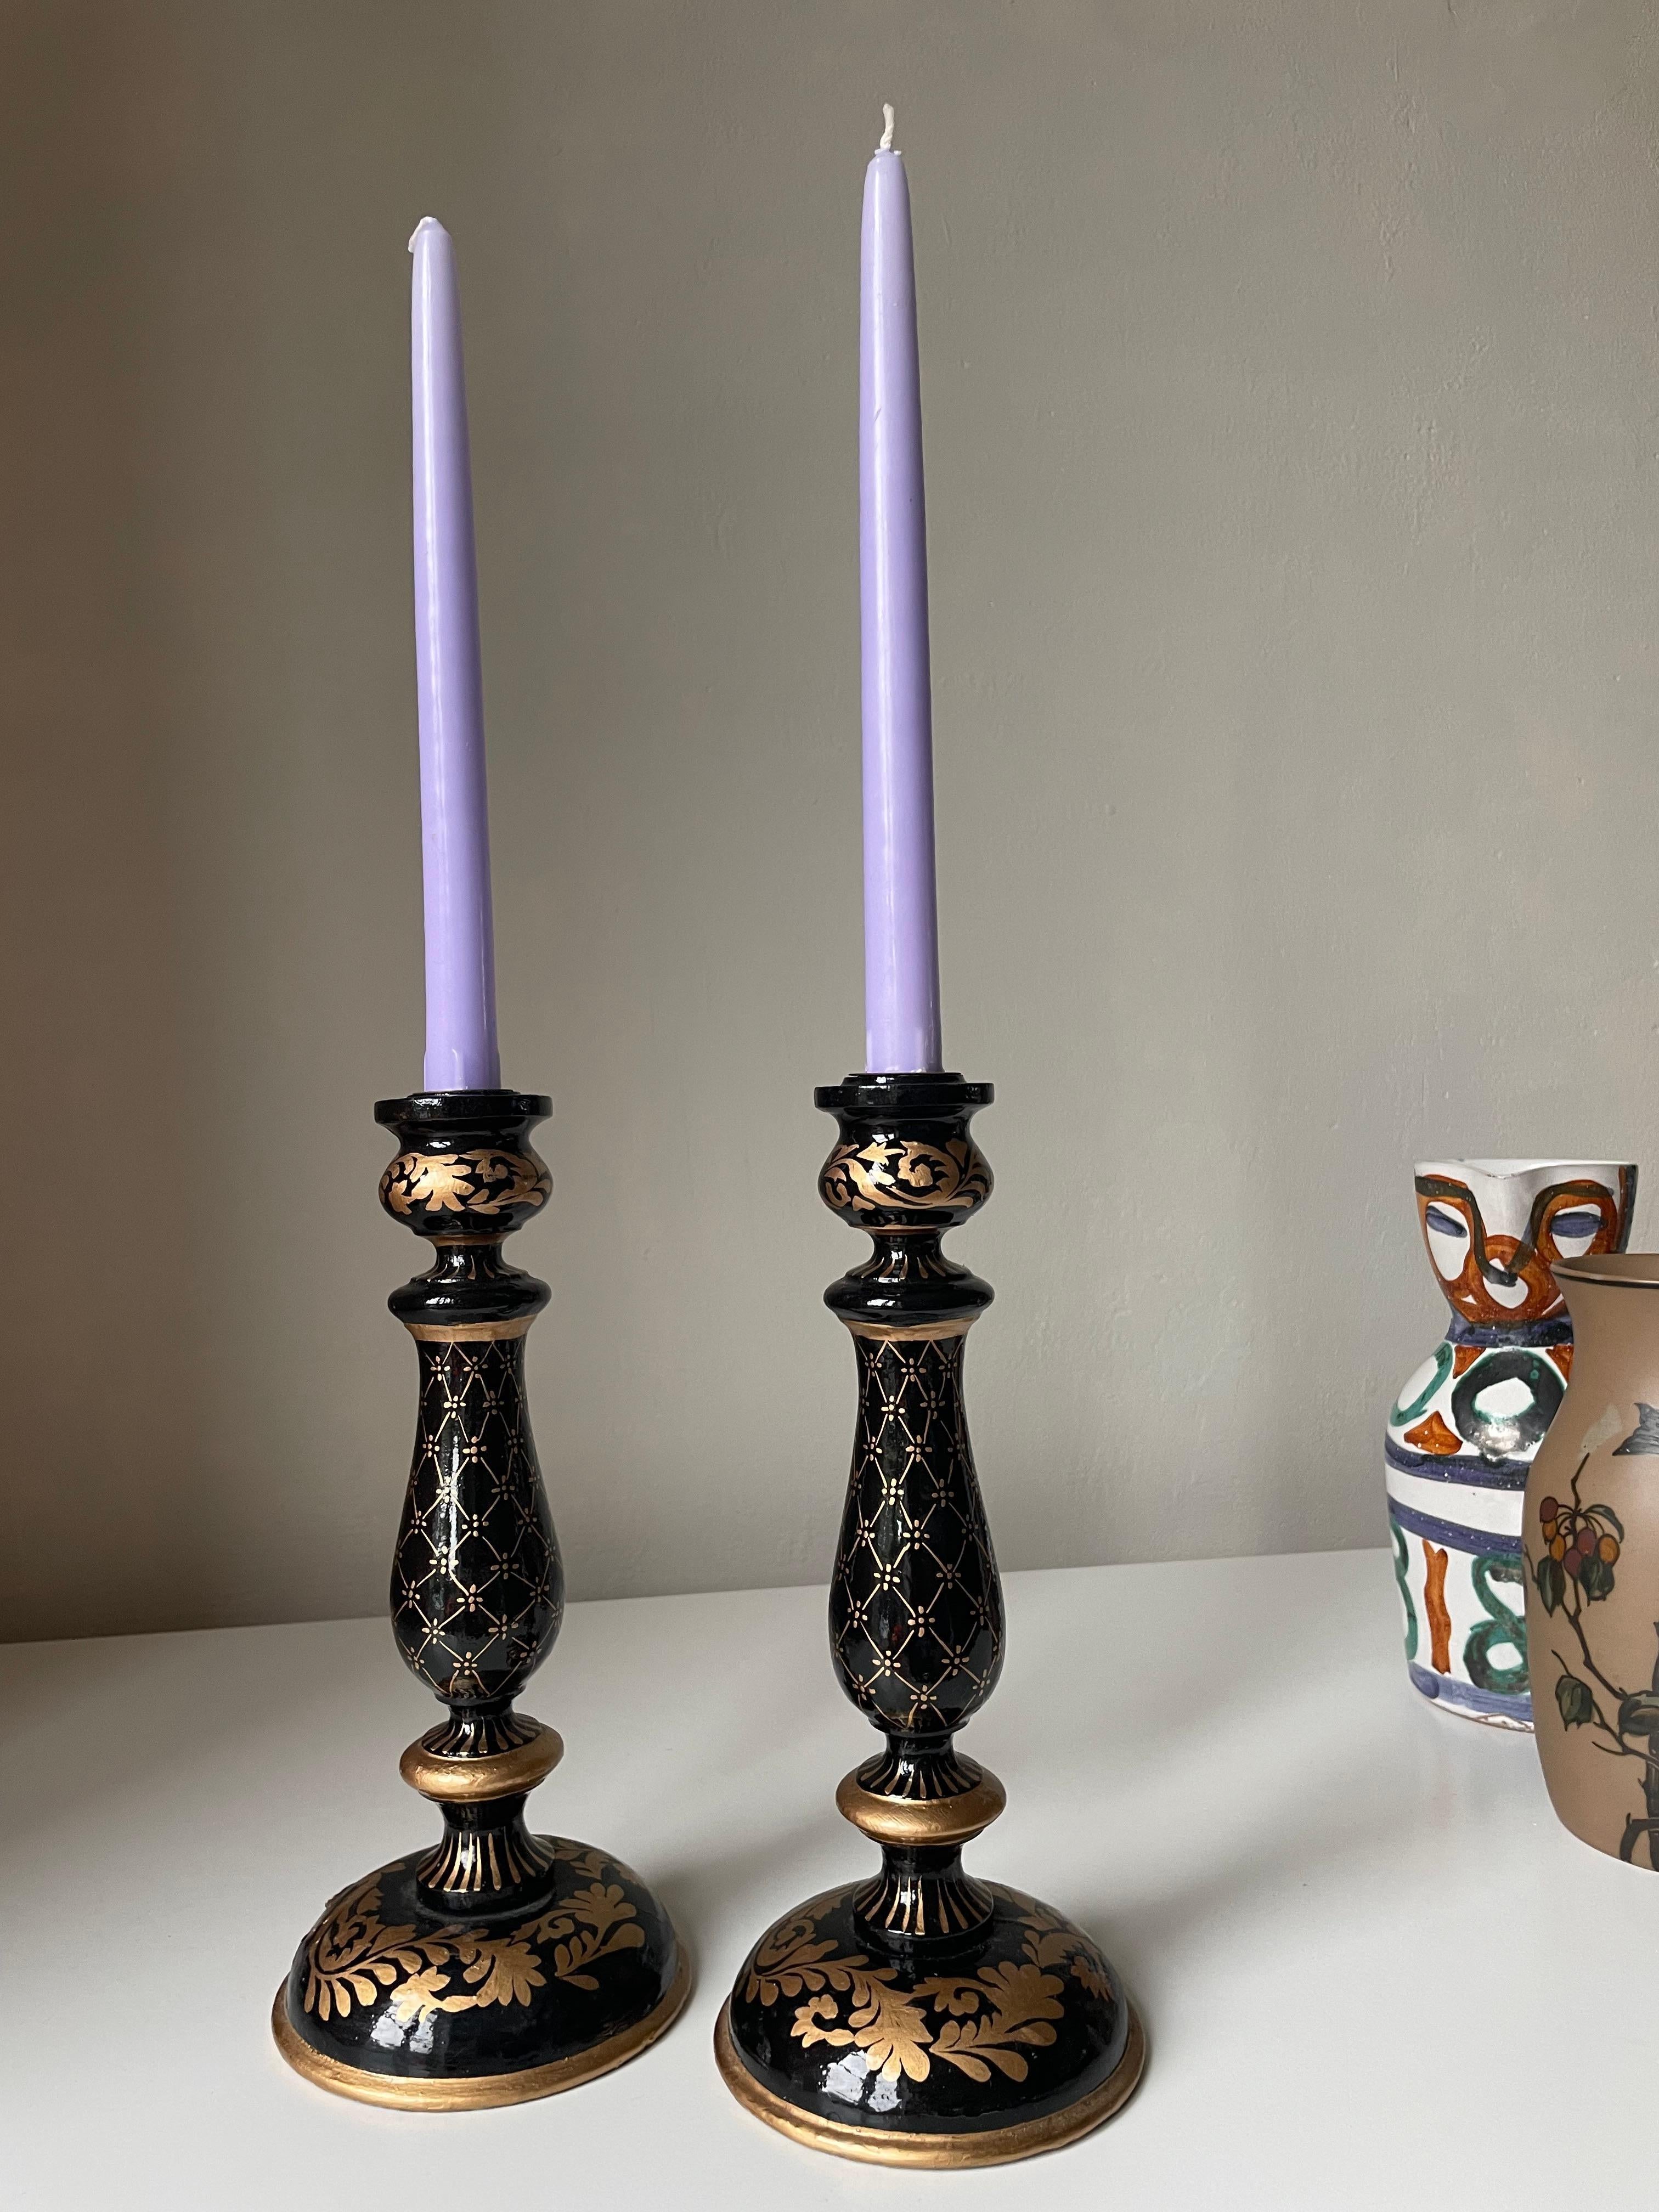 Set of vintage Norwegian wooden candle sticks with black and gold paint in intricate organic patterns. Beautiful vintage condition. 
Norway, 1970s. 